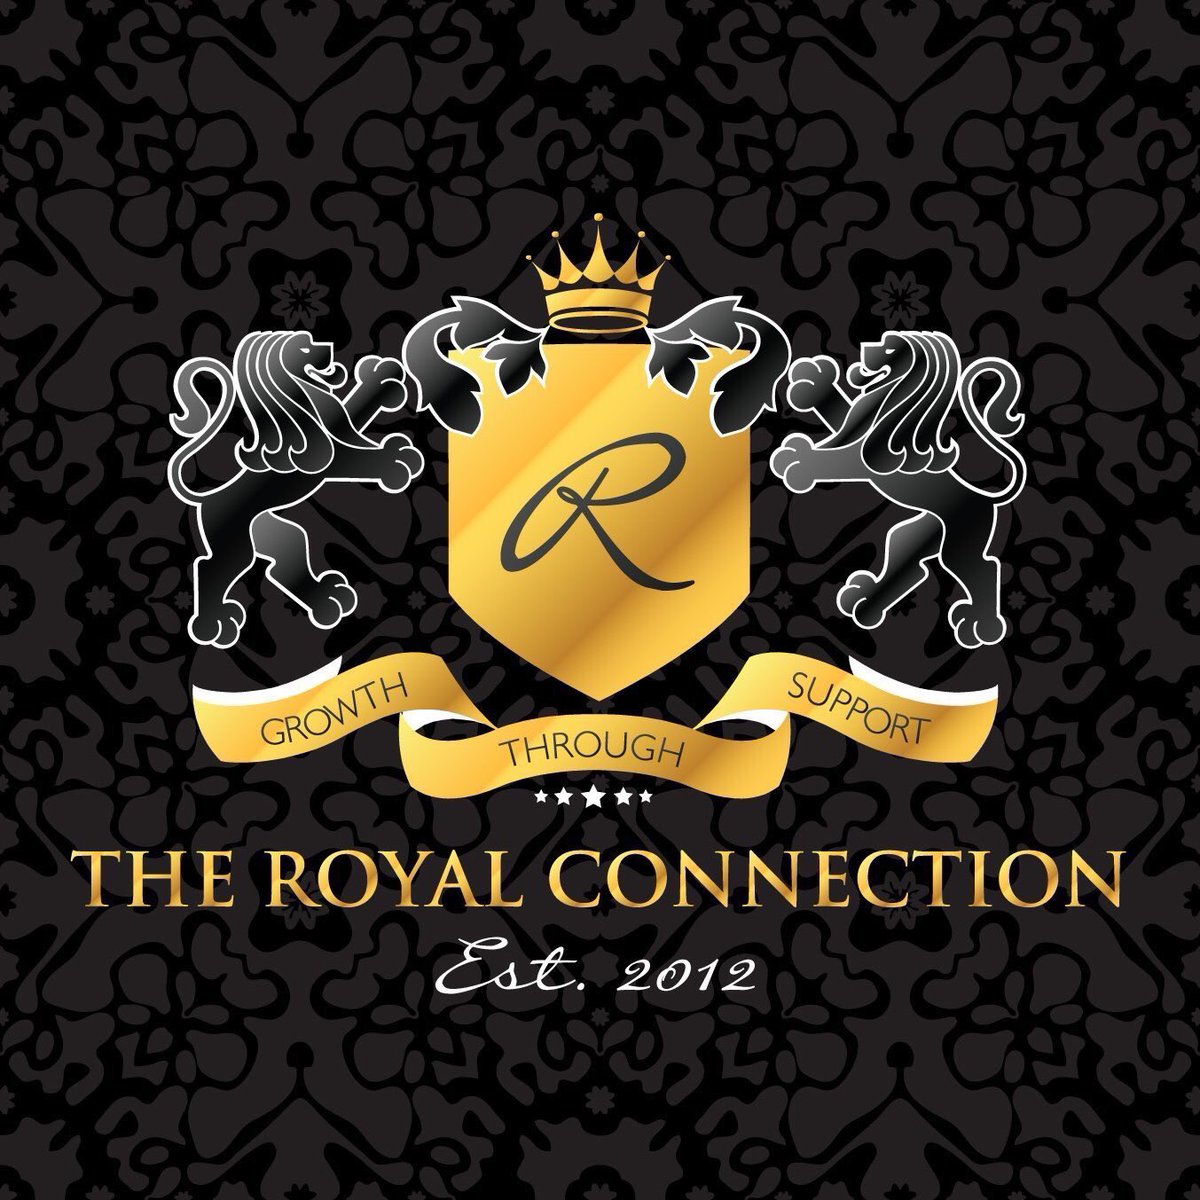 And we’re off! What makes your #smallbusiness unique? Send me your #QueenOf, #KingOf or #MonarchOf day #competition entry by 9pm and tell me why! Good luck! :-) #TRC #FemaleEntrepreneur #Male #Entrepreneur #LGBTQ #RoyalConnection #ShopIndie #BizBubble